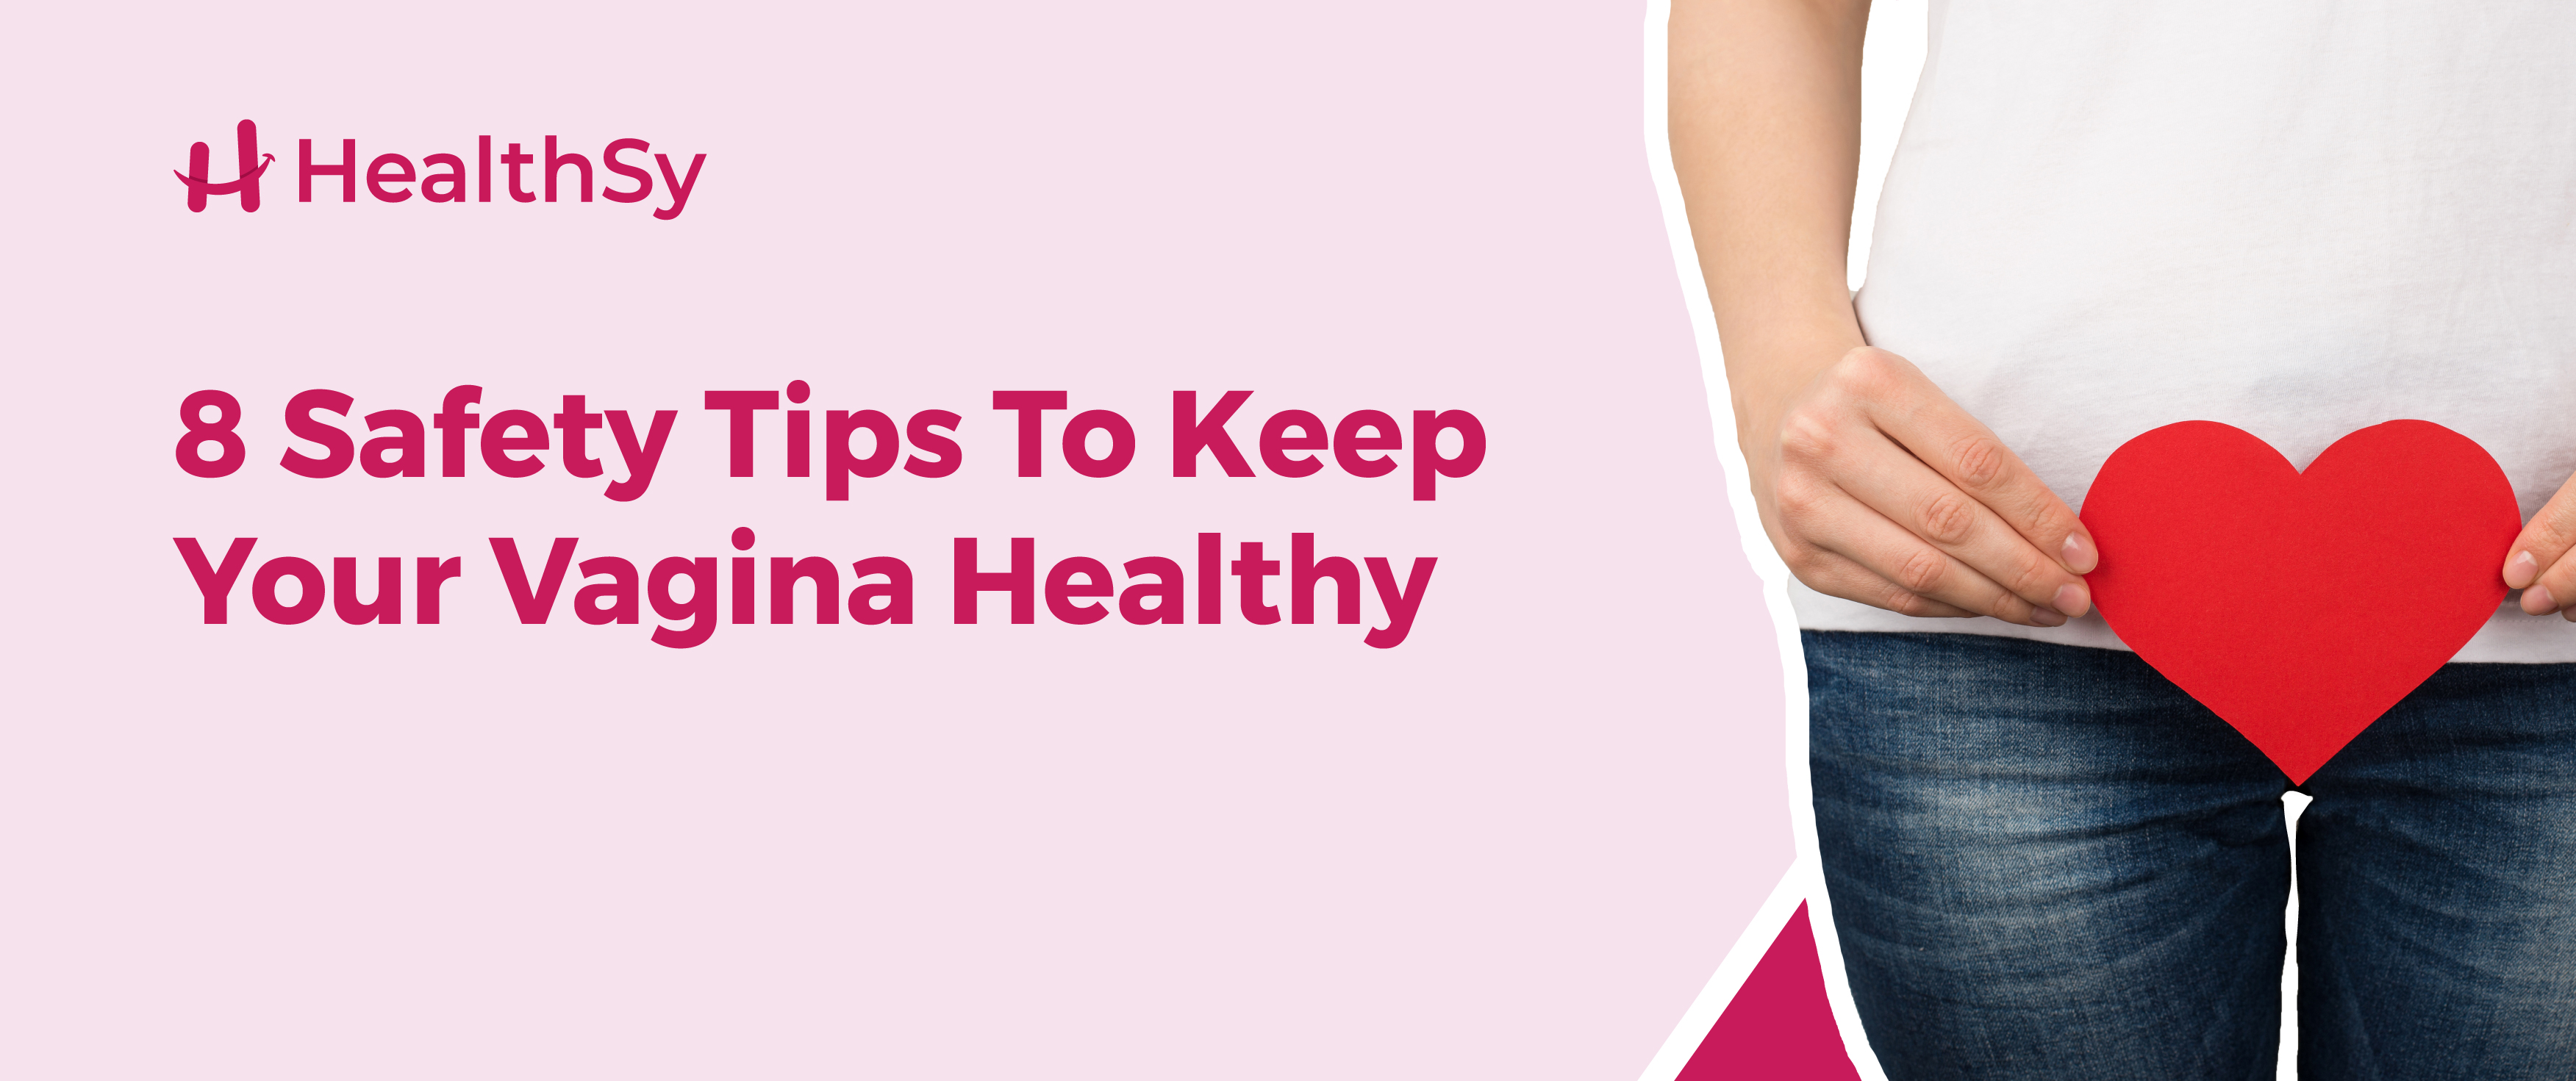 Safety Tips for a Healthy Vagina - HealthSy Article